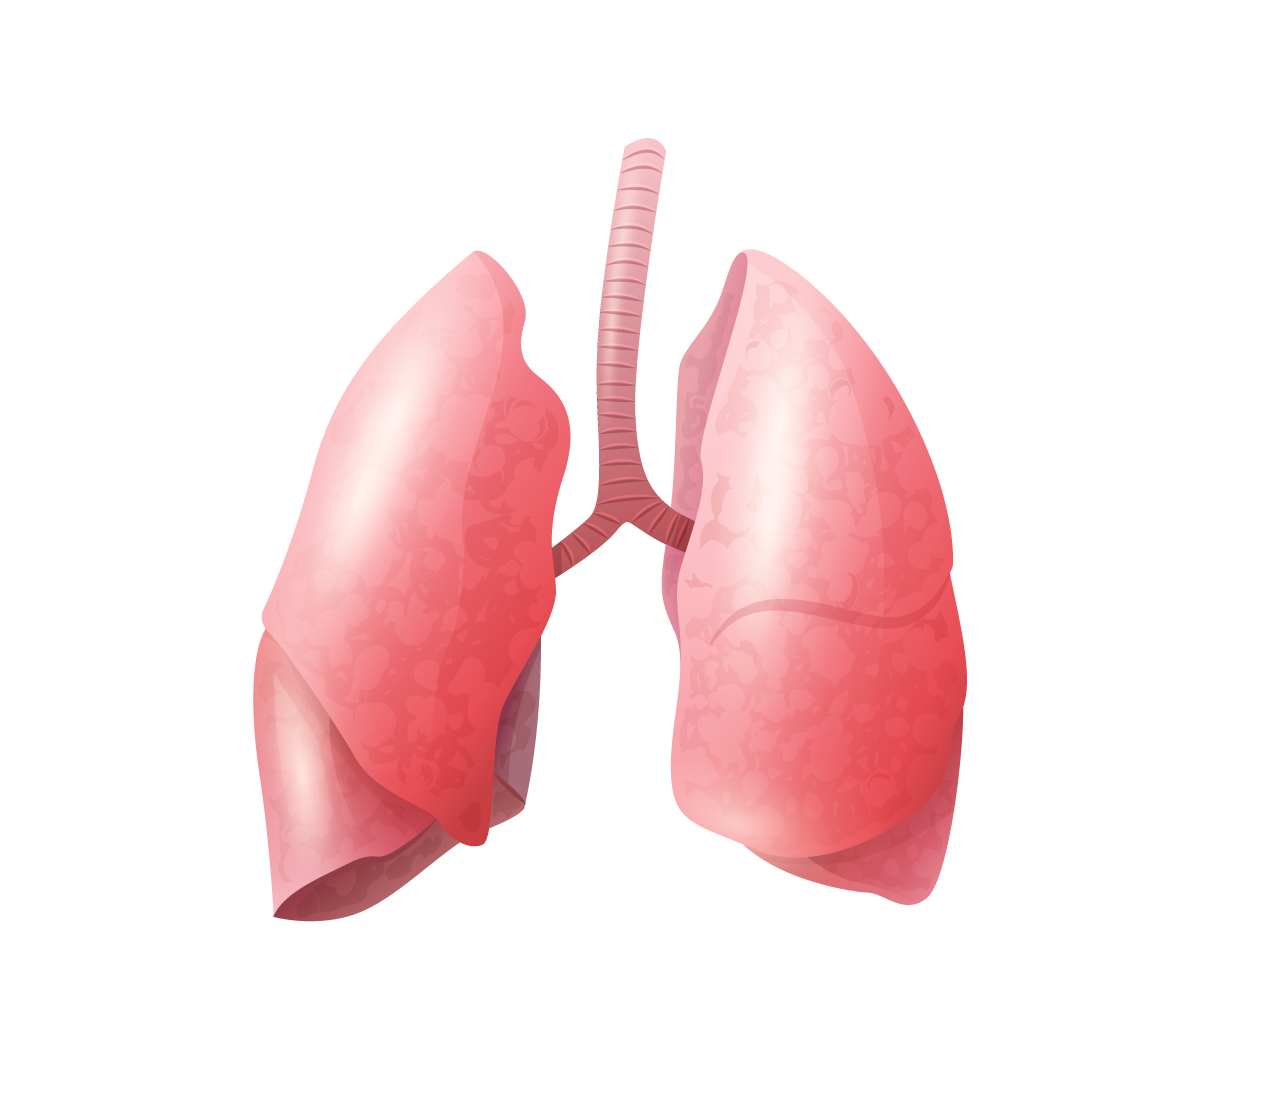 Lungs2